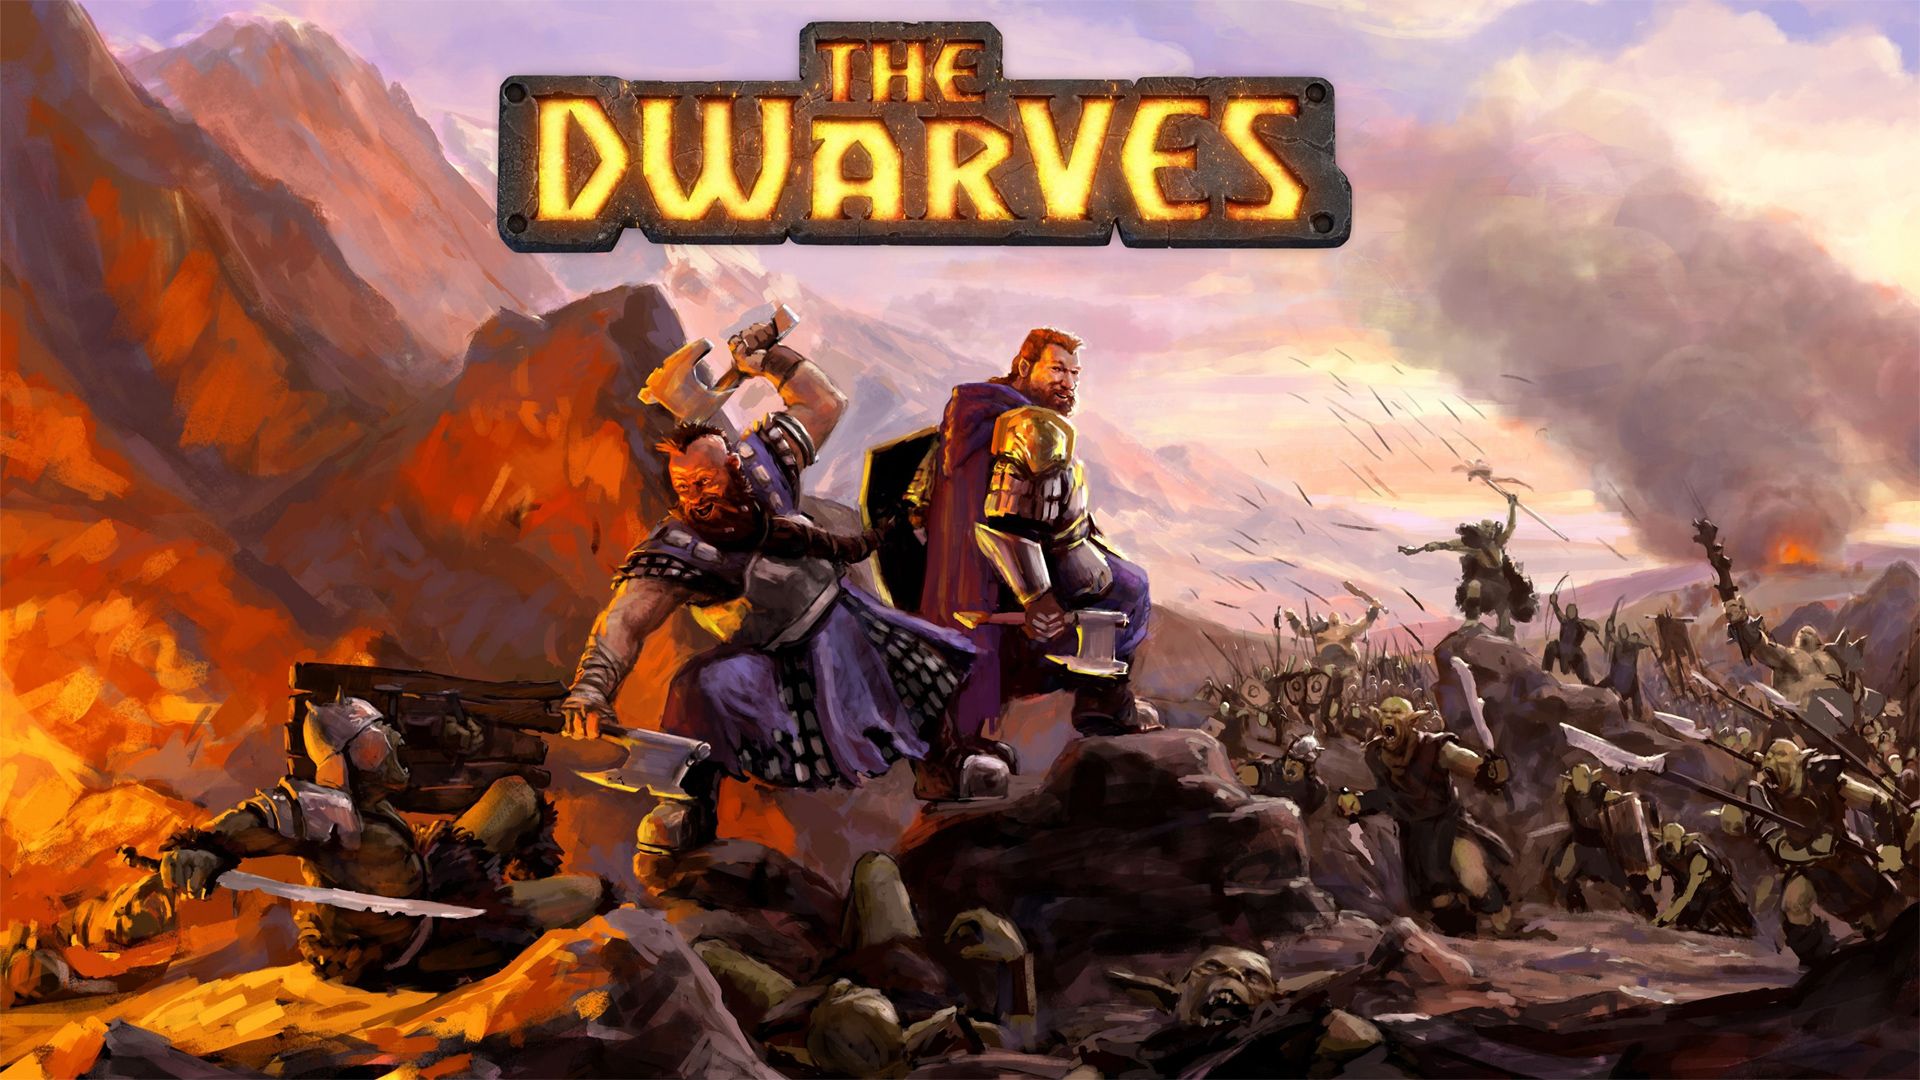 Wallpaper from The Dwarves